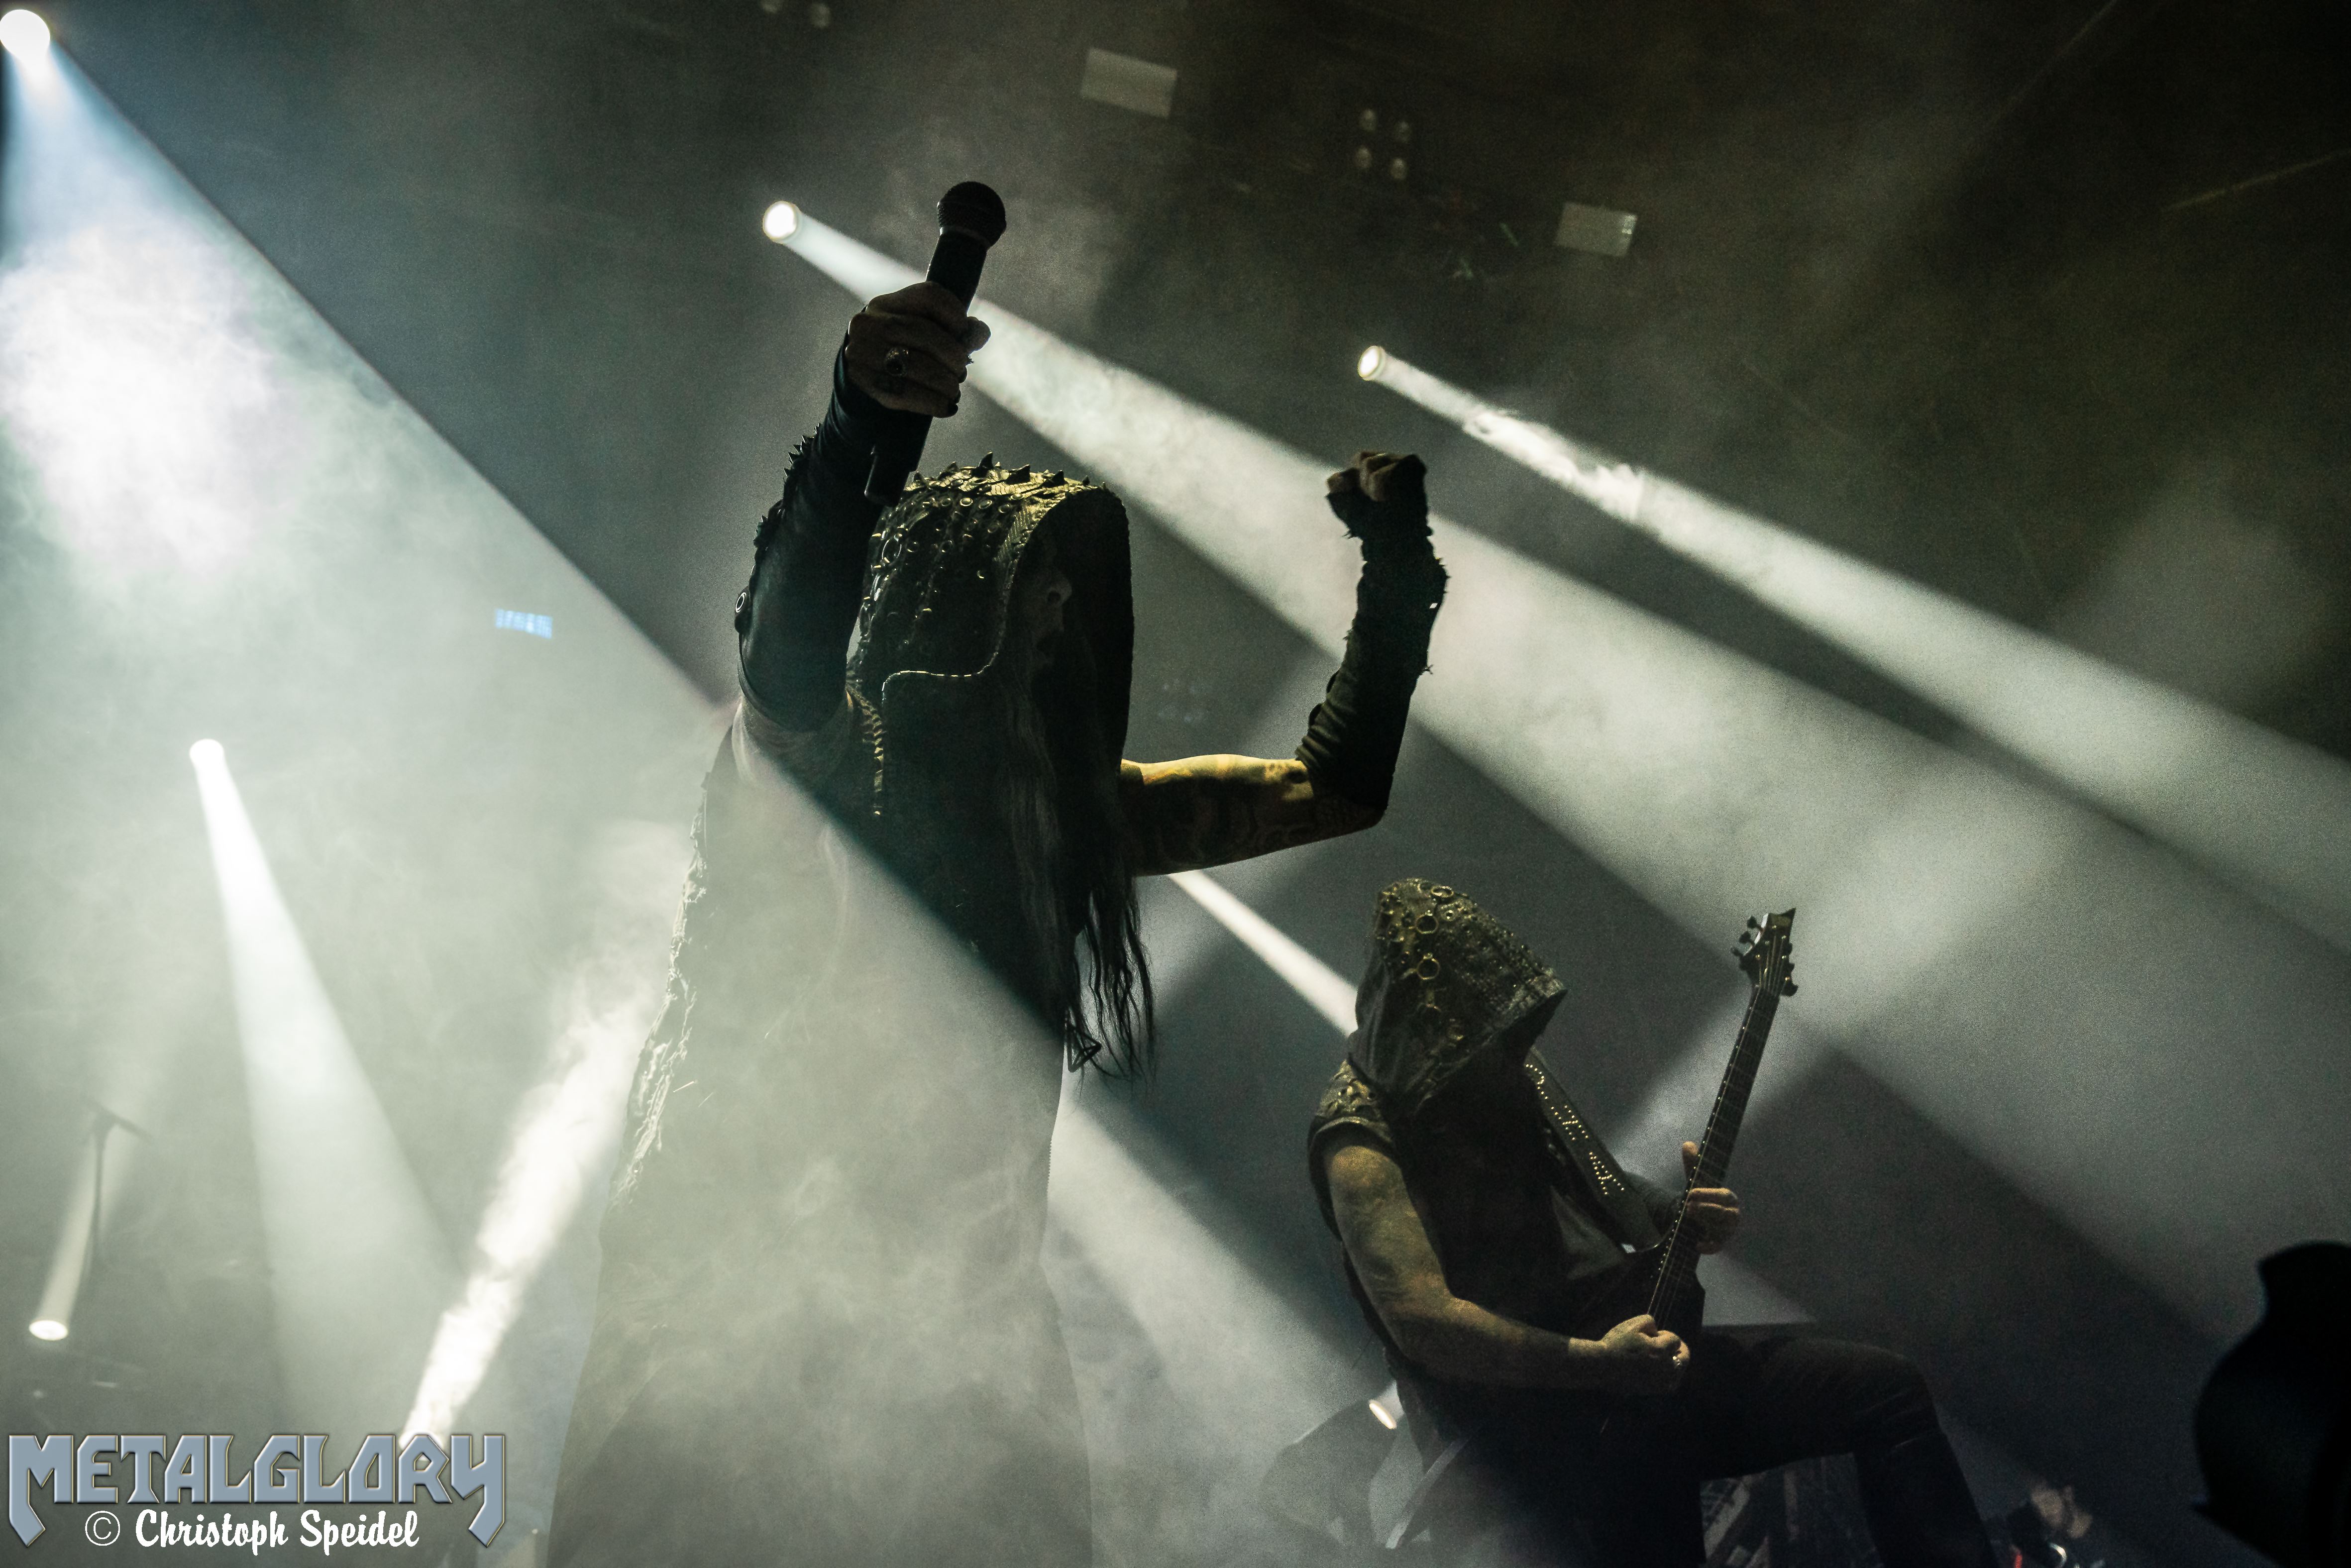 Dimmu Borgir & Amorphis „European Tour 2020“, Support Wolves in the Throne Room, 01.02.2020, Swiss Life Hall, Hannover